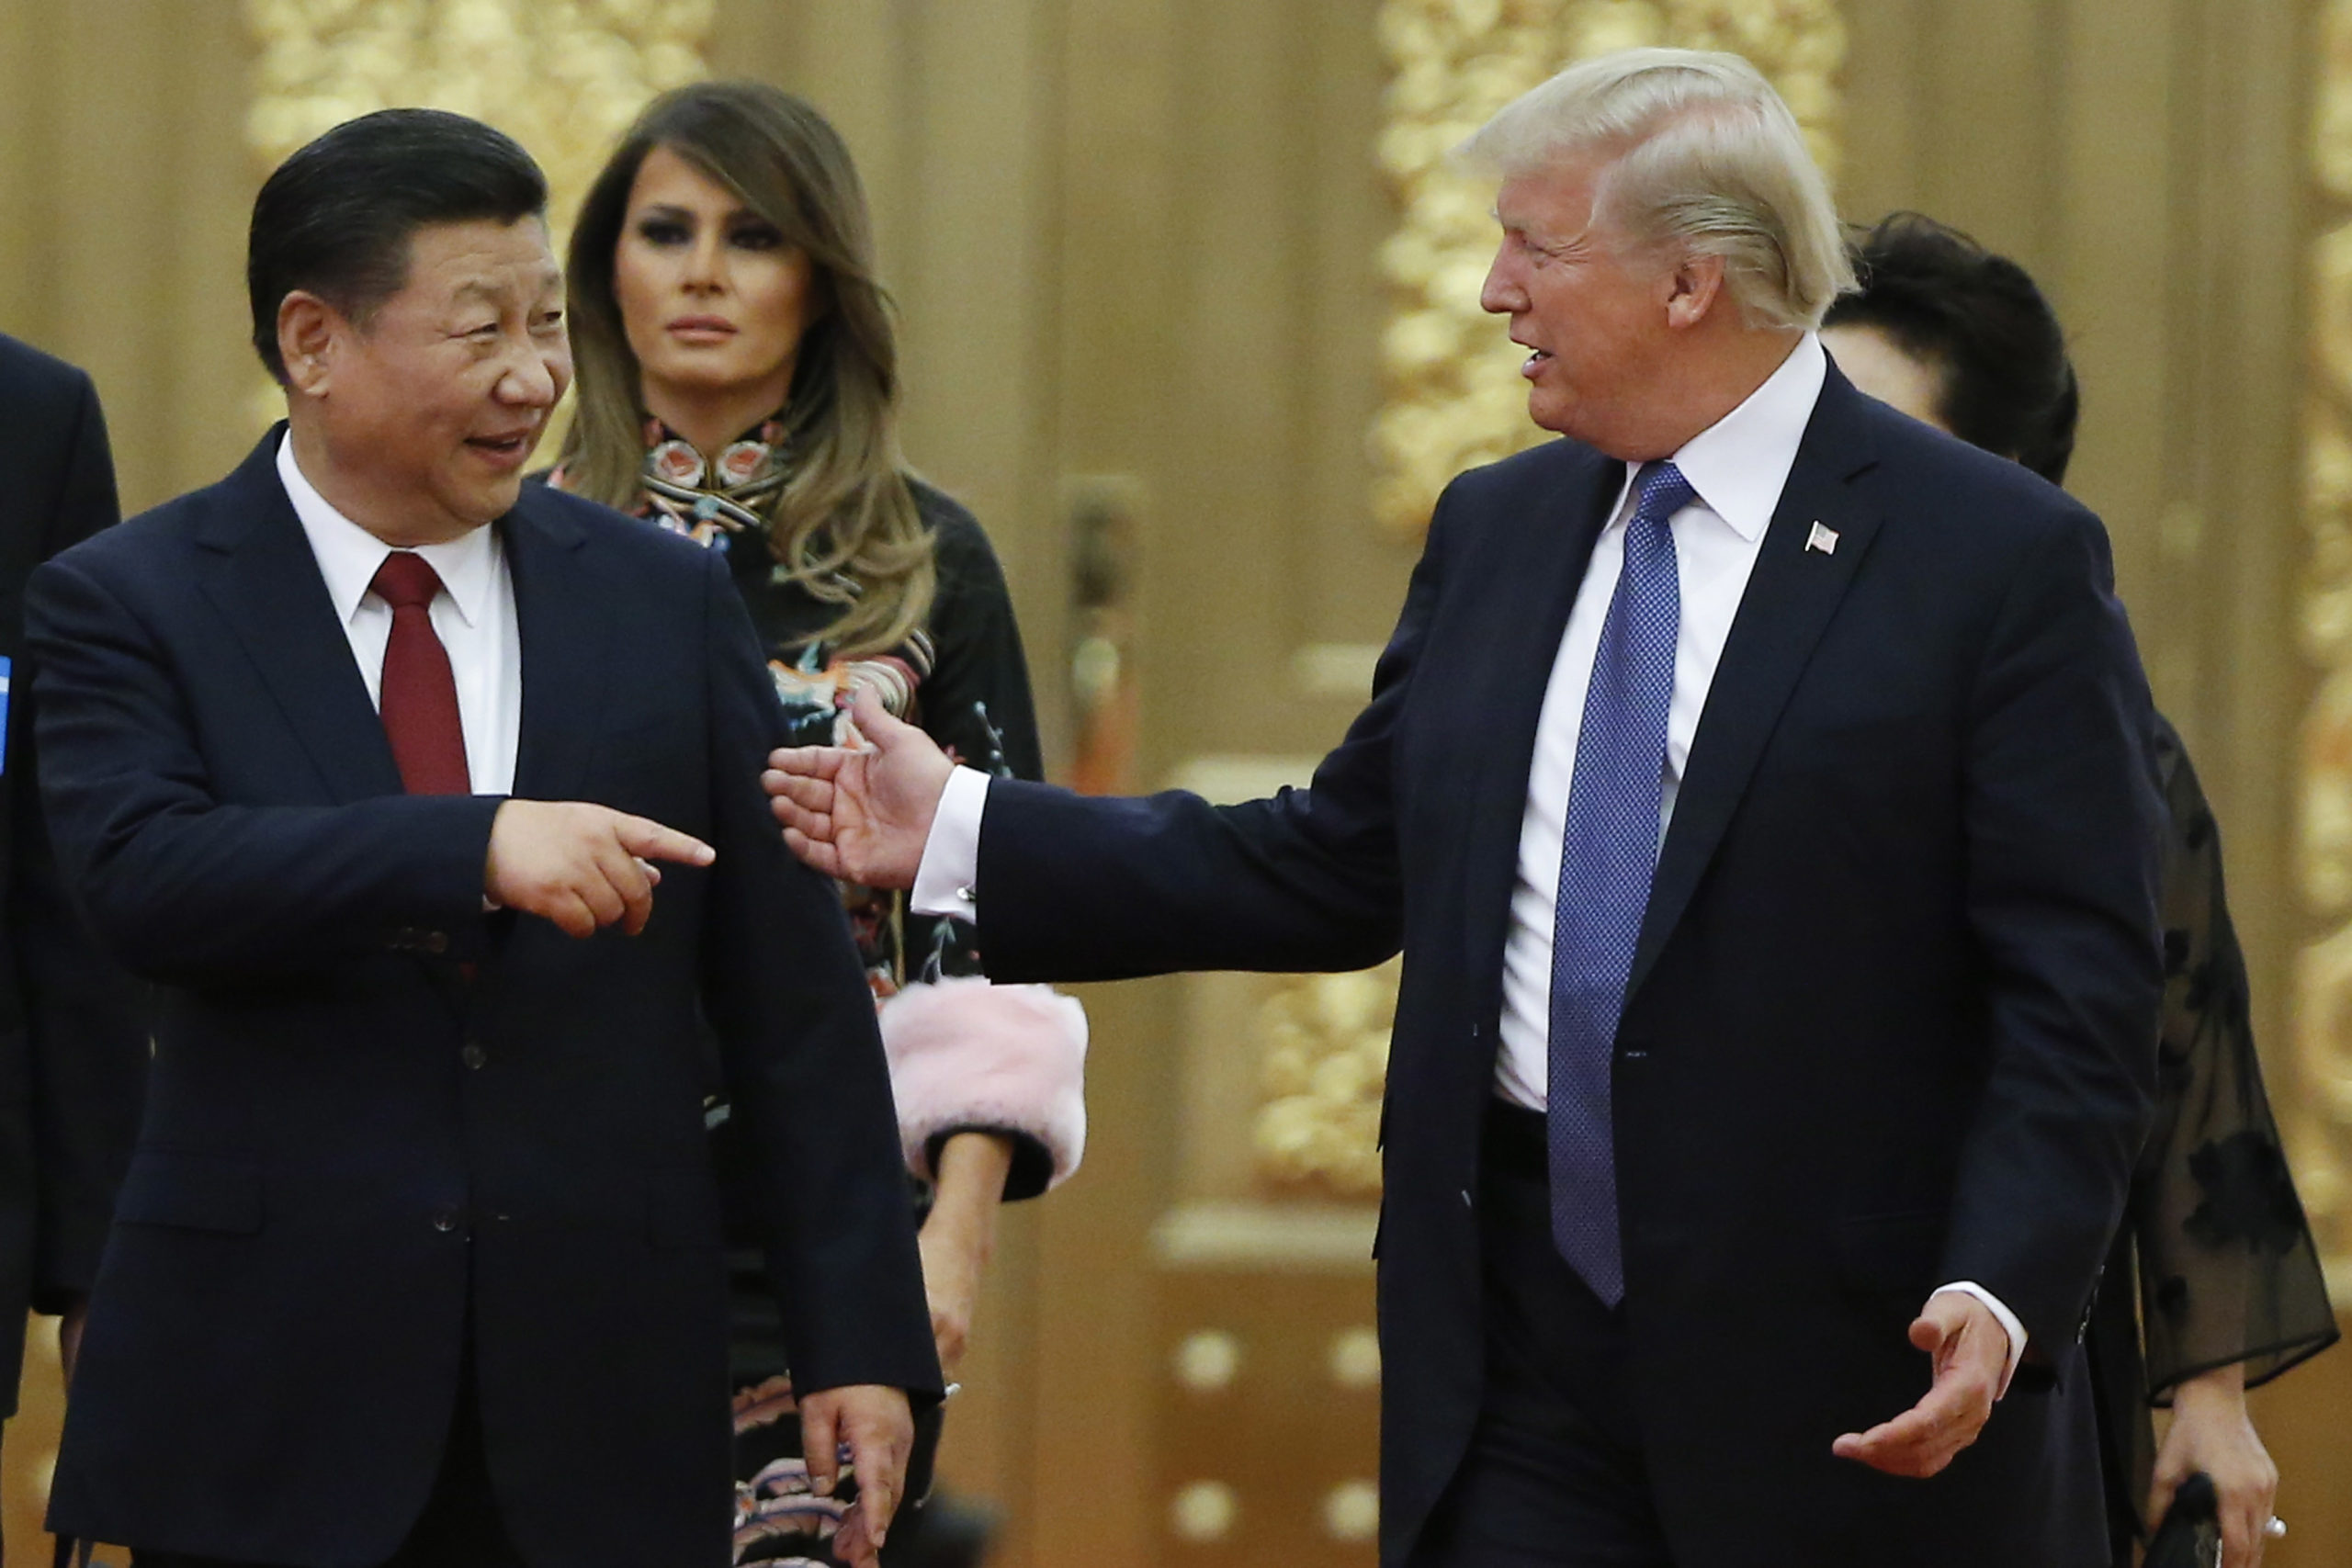 BEIJING, CHINA - NOVEMBER 9: U.S. President Donald Trump and China's President Xi Jinping arrive at a state dinner at the Great Hall of the People on November 9, 2017 in Beijing, China. Trump is on a 10-day trip to Asia. (Photo by Thomas Peter - Pool/Getty Images)